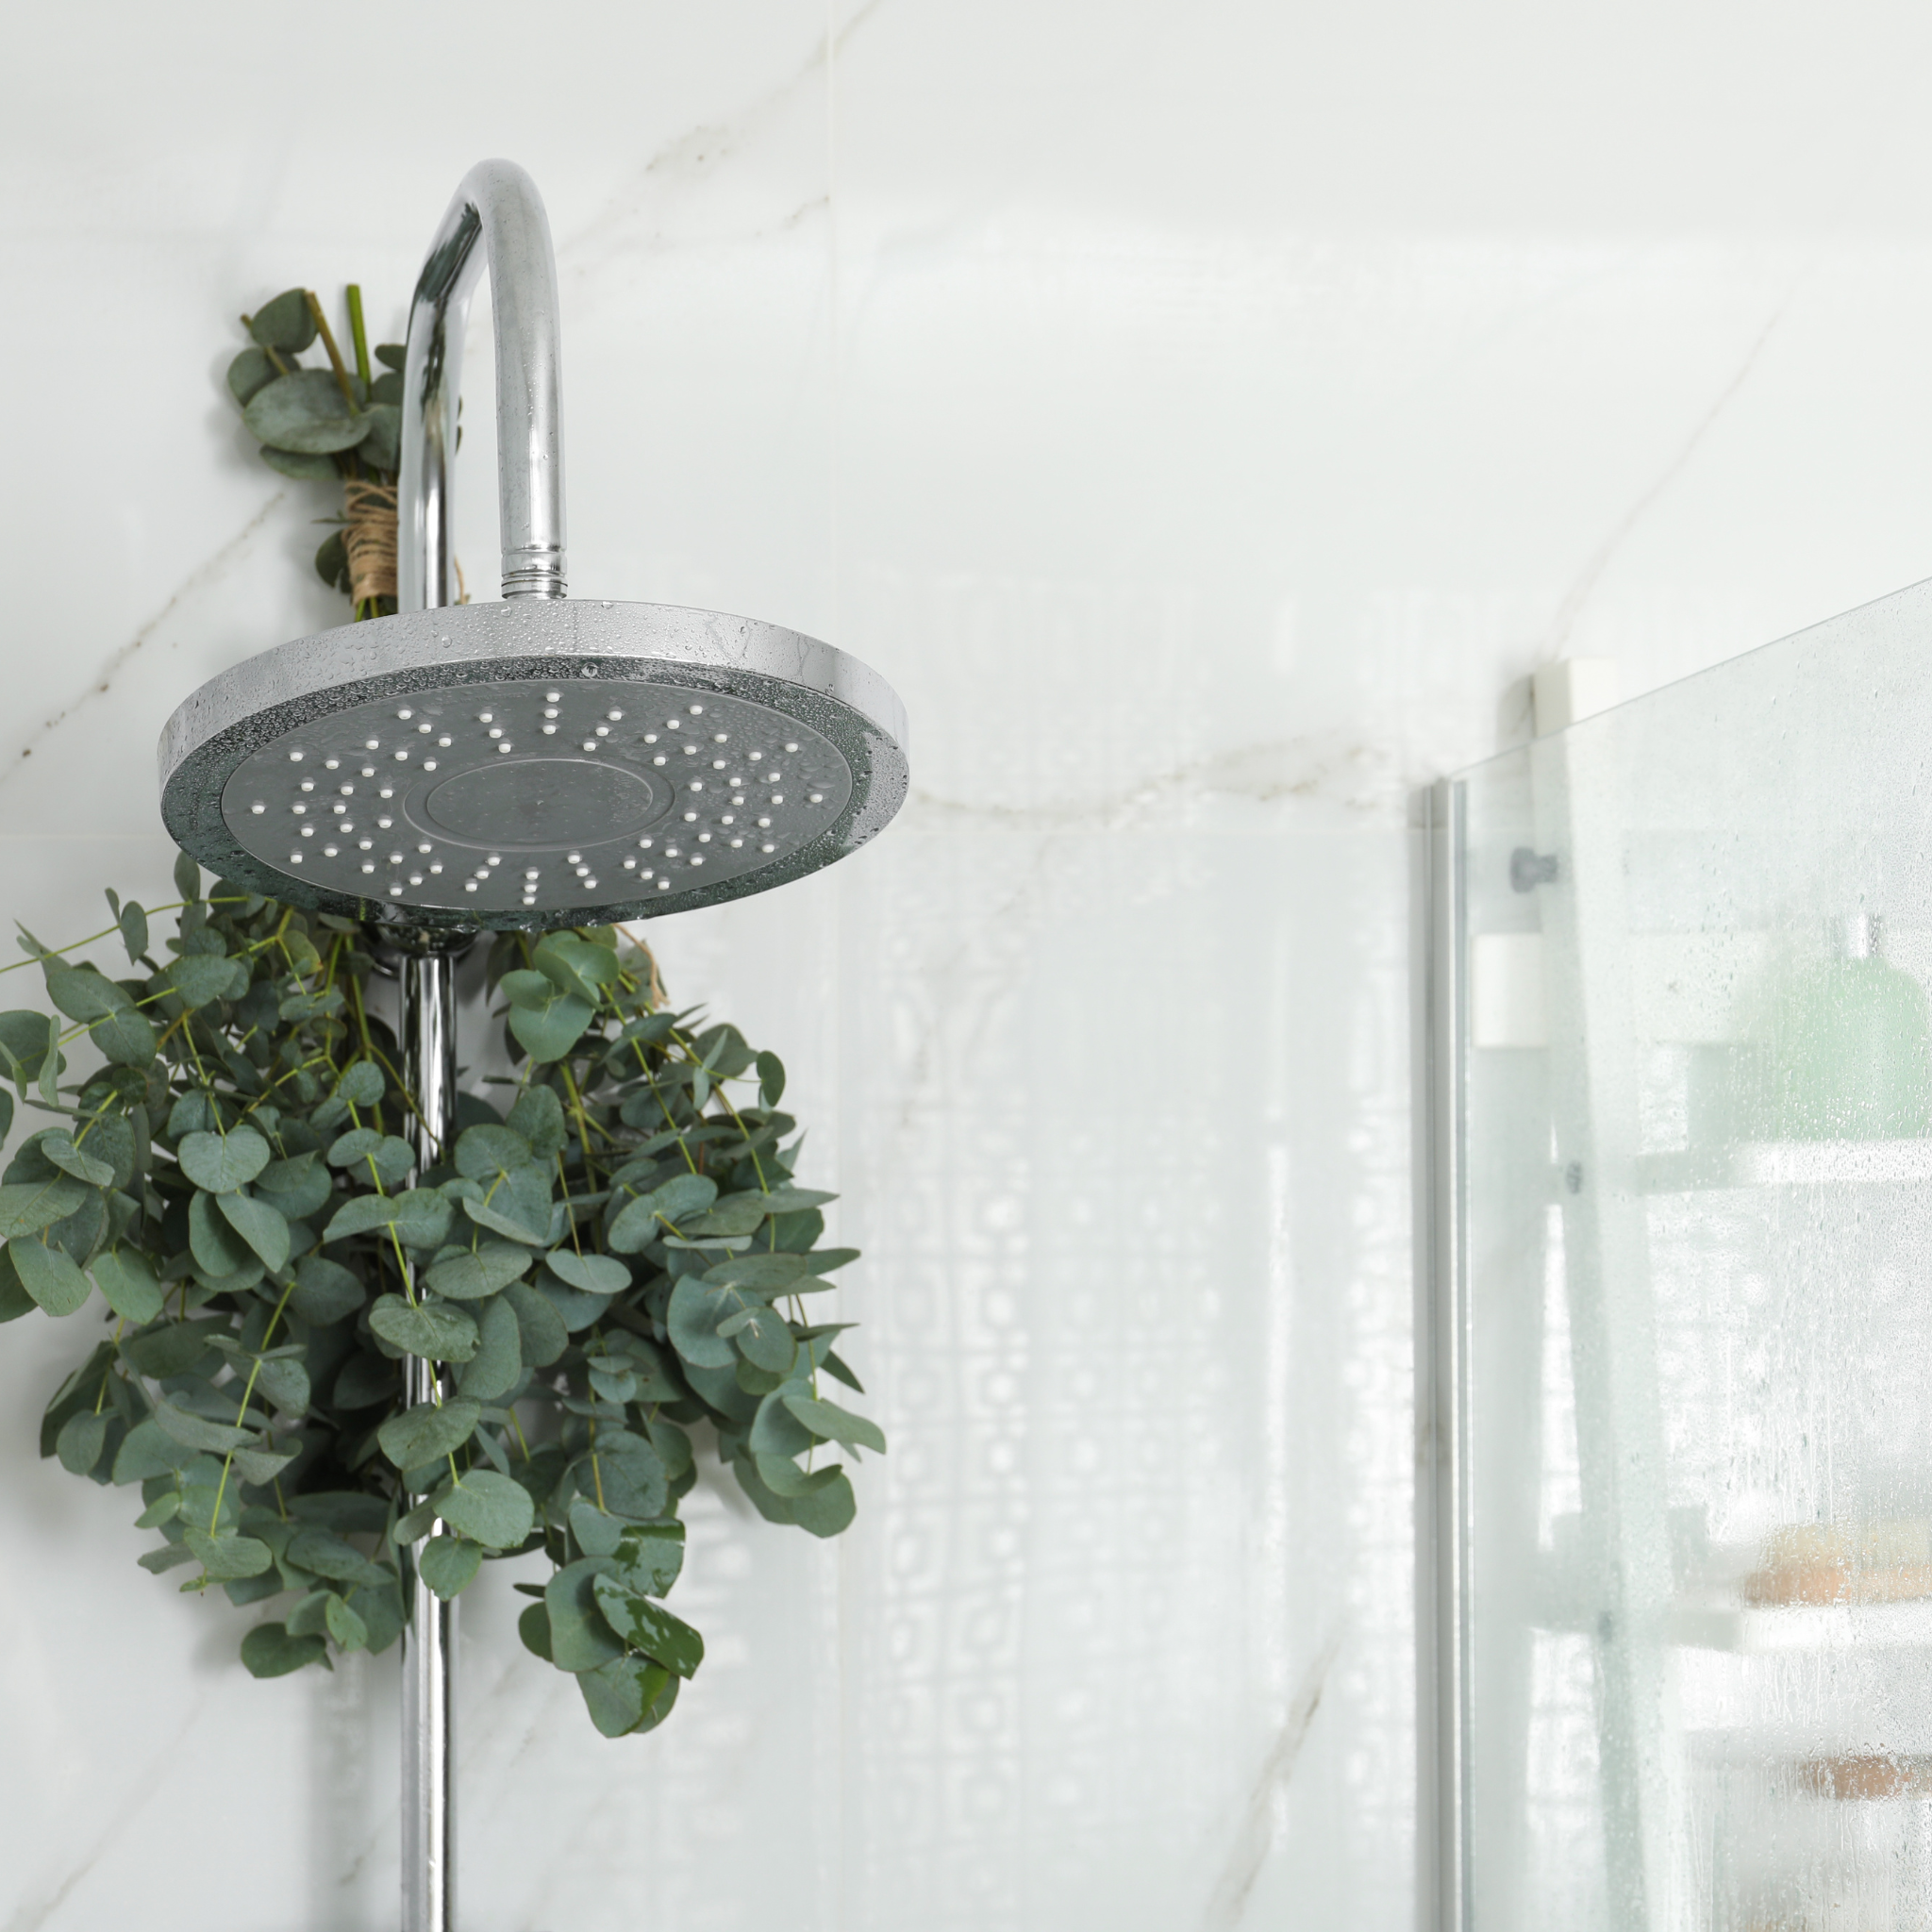 Shower Head with Eucalyptus Leaves Hanging on White Background Ad for Wax Melt Home Fragrances